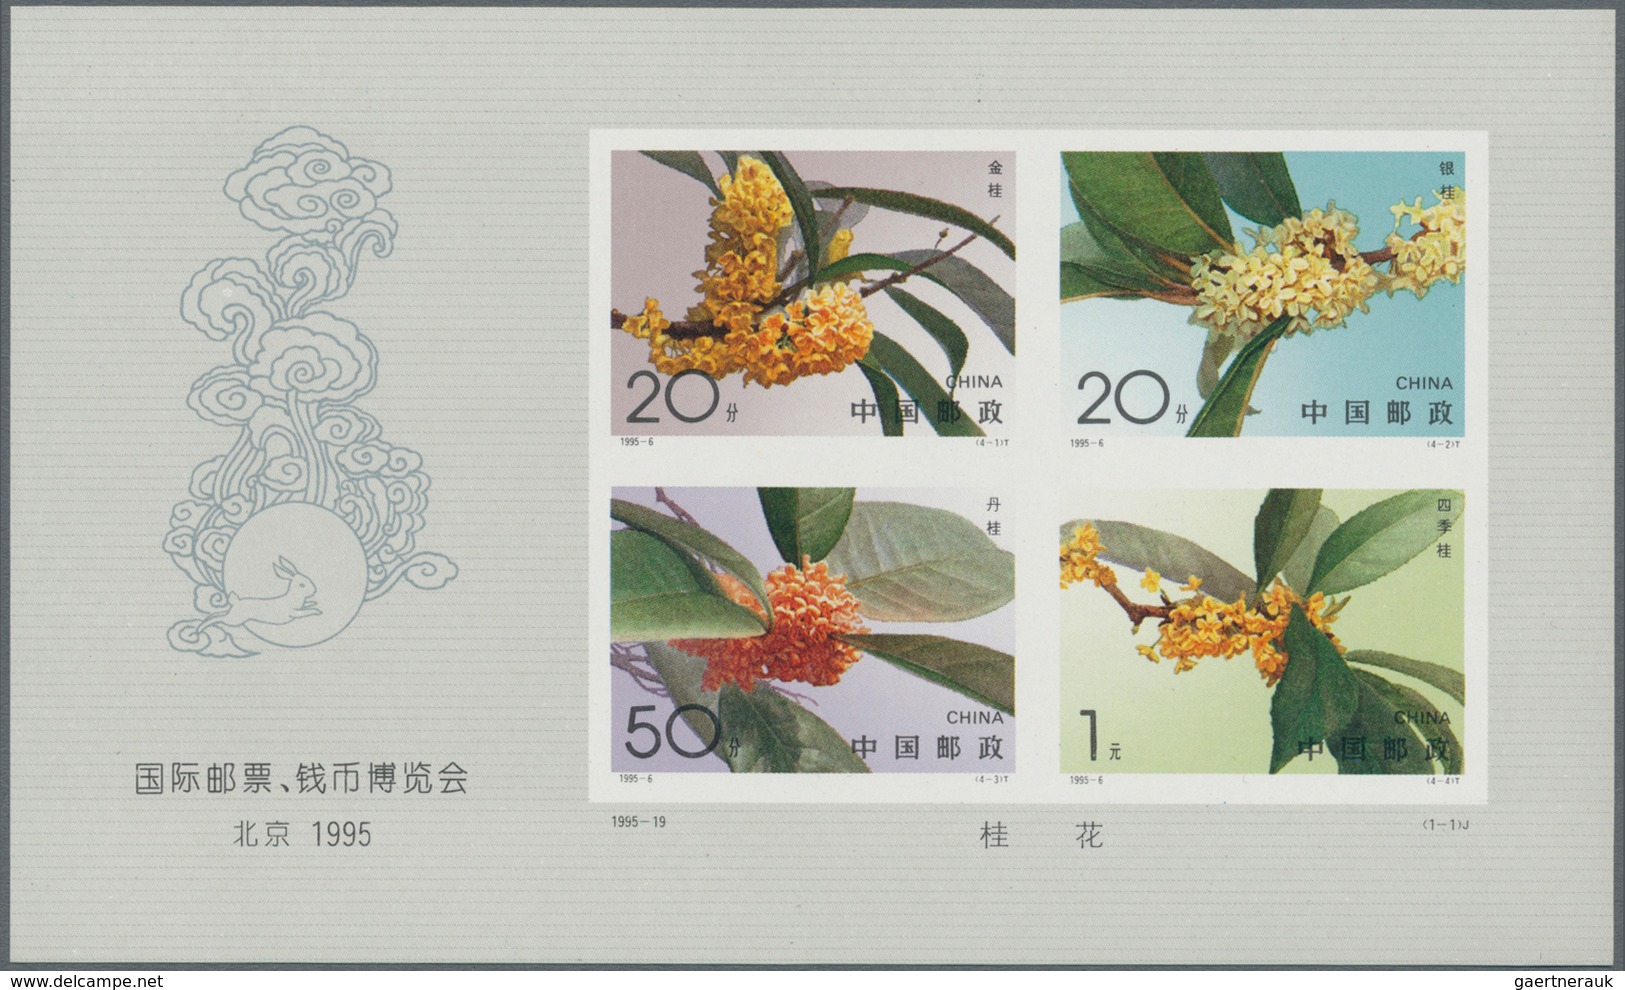 China - Volksrepublik: 1995, stamp and coin exhibition s/s, imperforated (4), mint never hinged MNH;